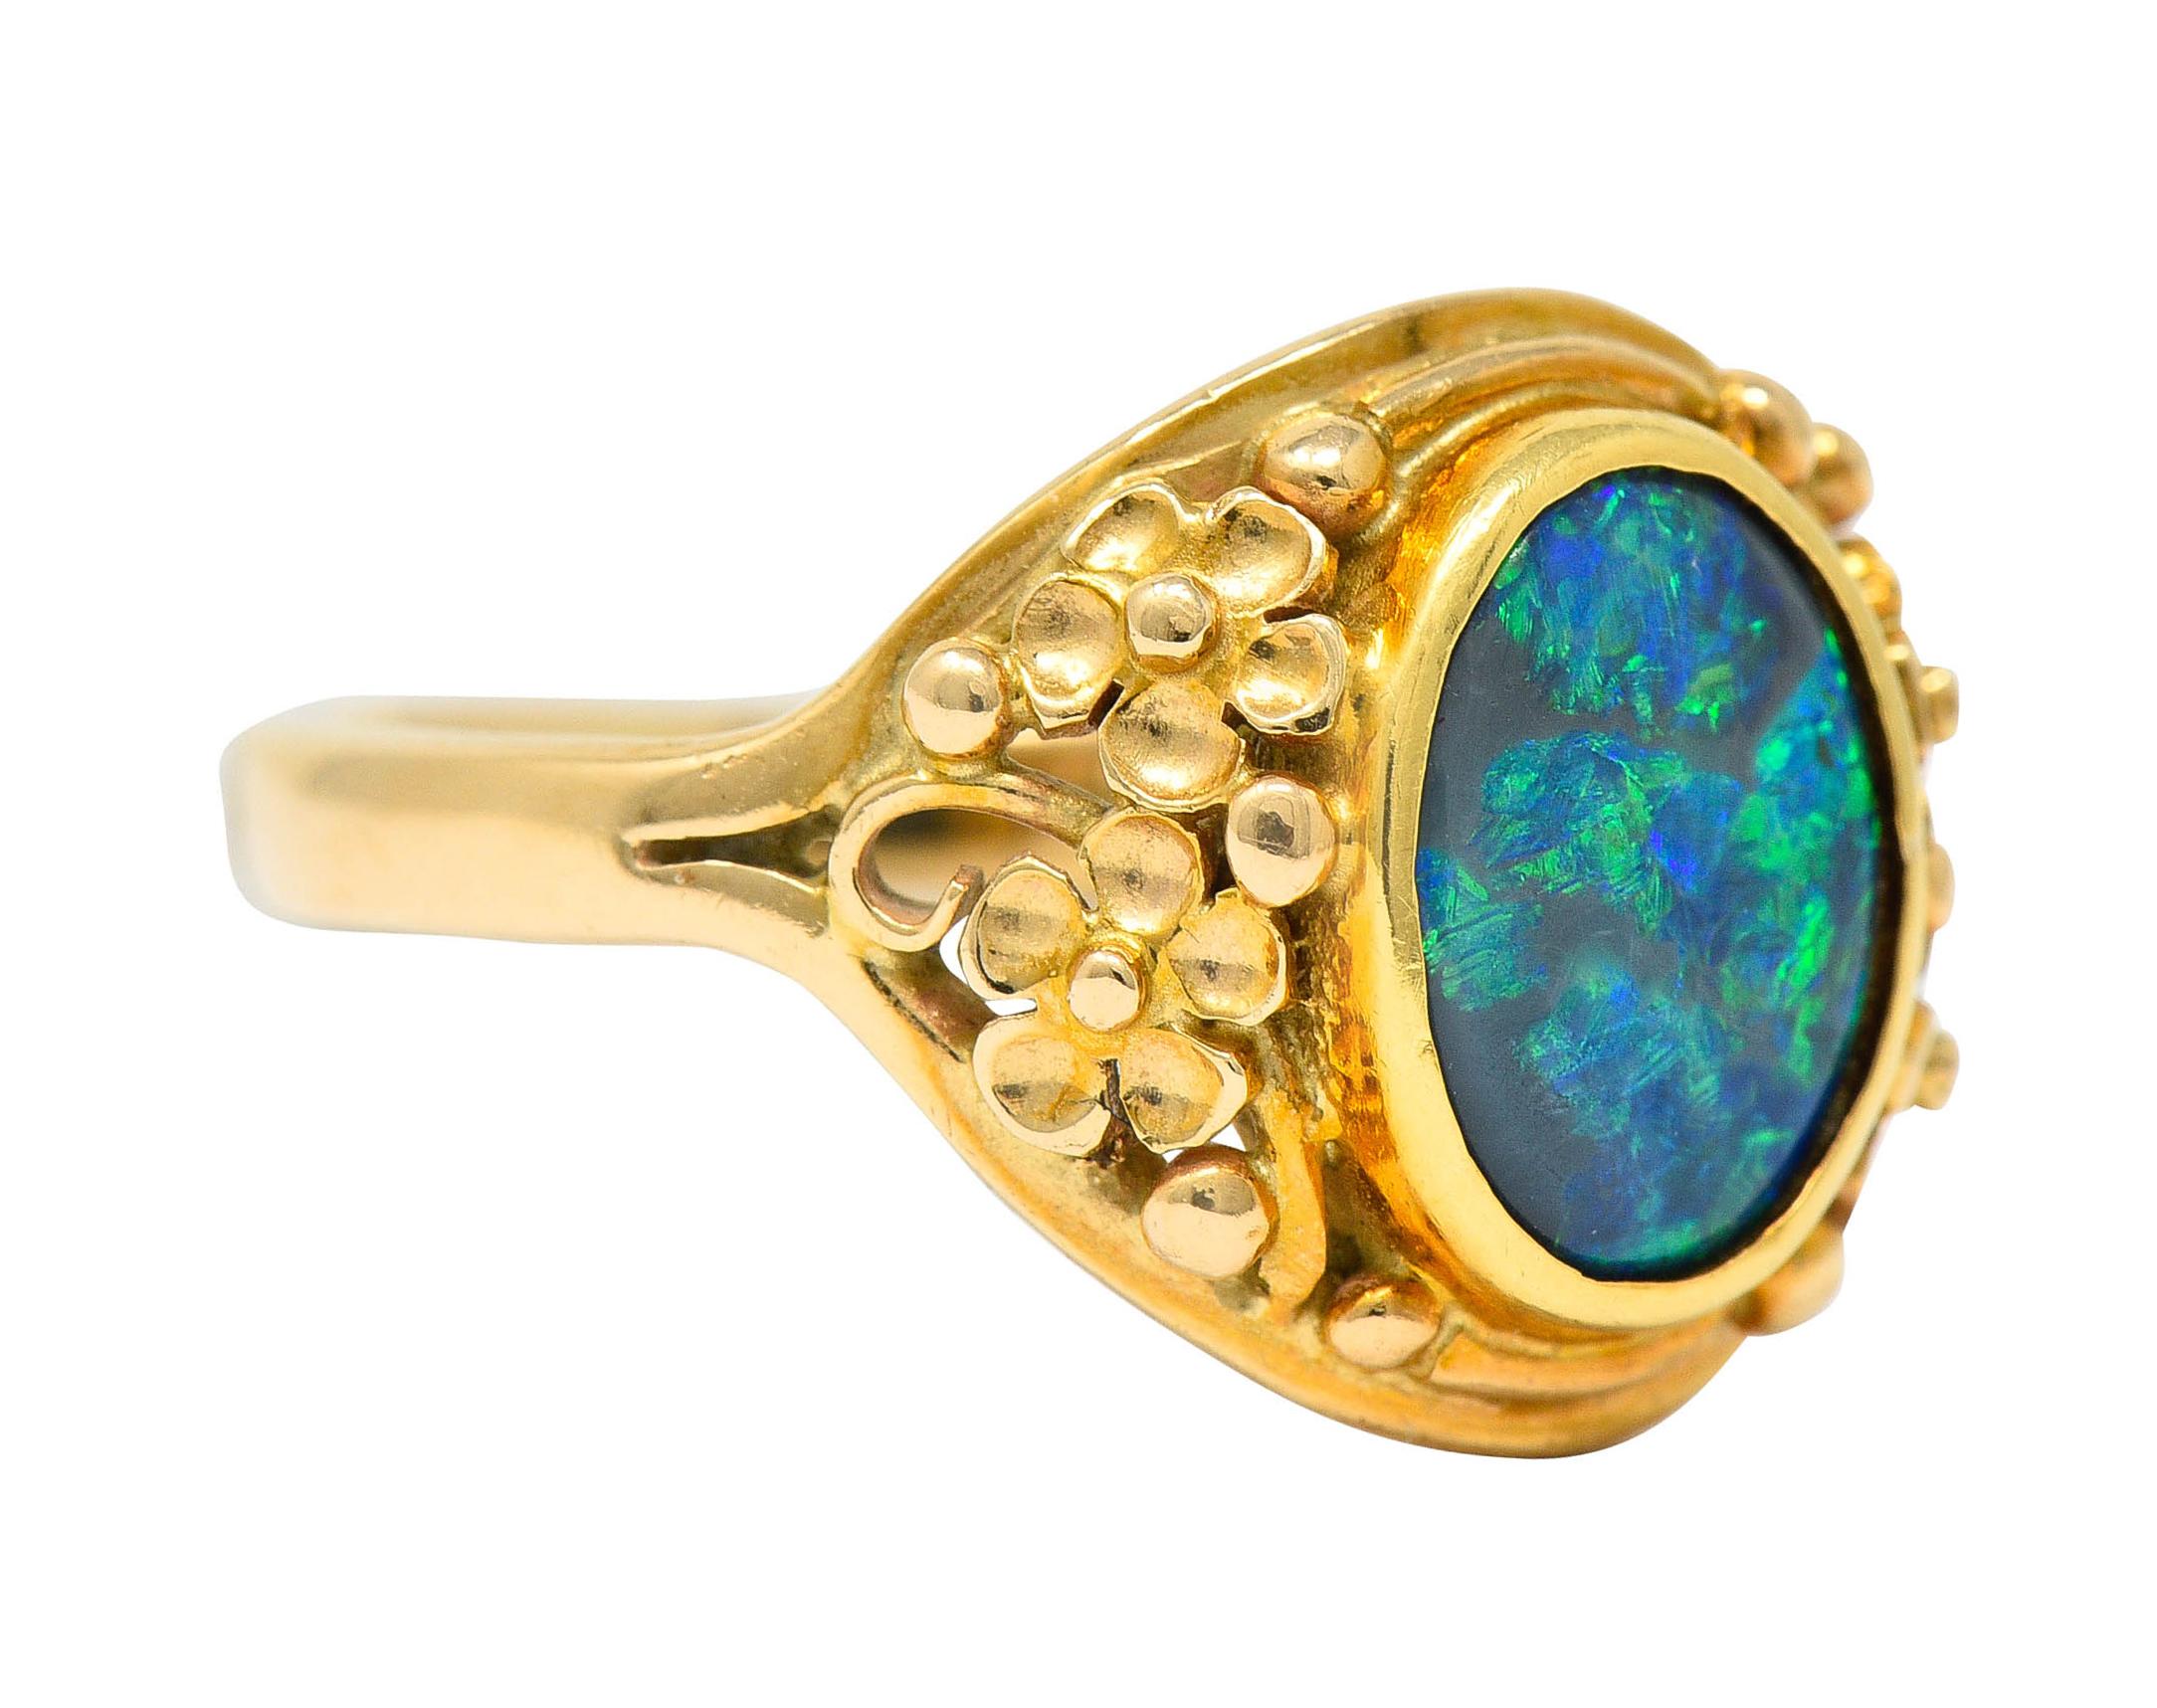 Centering a bezel set black opal cabochon

With vivid play of color and measuring 8.5mm x 6.5mm

Set within a 14 karat gold mount and flanked by floral accented shoulders

Marked 14k for 14 karat gold

Circa: 1910

Ring Size: 5 1/4 &